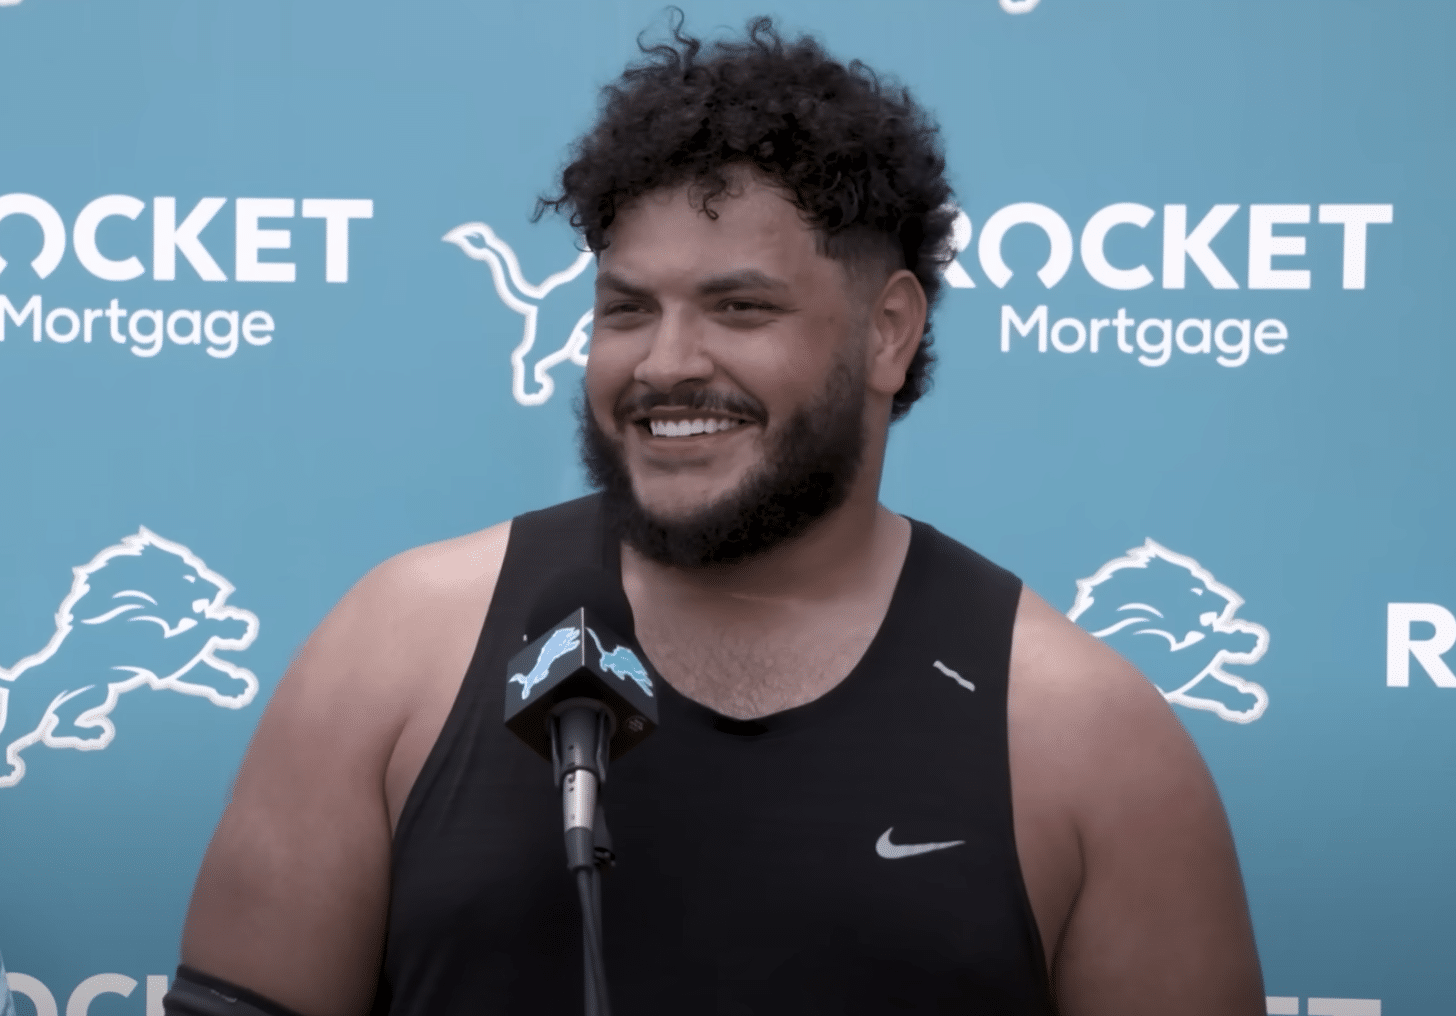 Detroit Lions OG Jonah Jackson Detroit Lions players Detroit Lions LG Jonah Jackson Detroit Lions Who Could Become Unrestricted Free Agents Jonah Jackson weighs in on Jared Goff Jonah Jackson suffers injury Jonah Jackson injury update Detroit Lions Free Agency